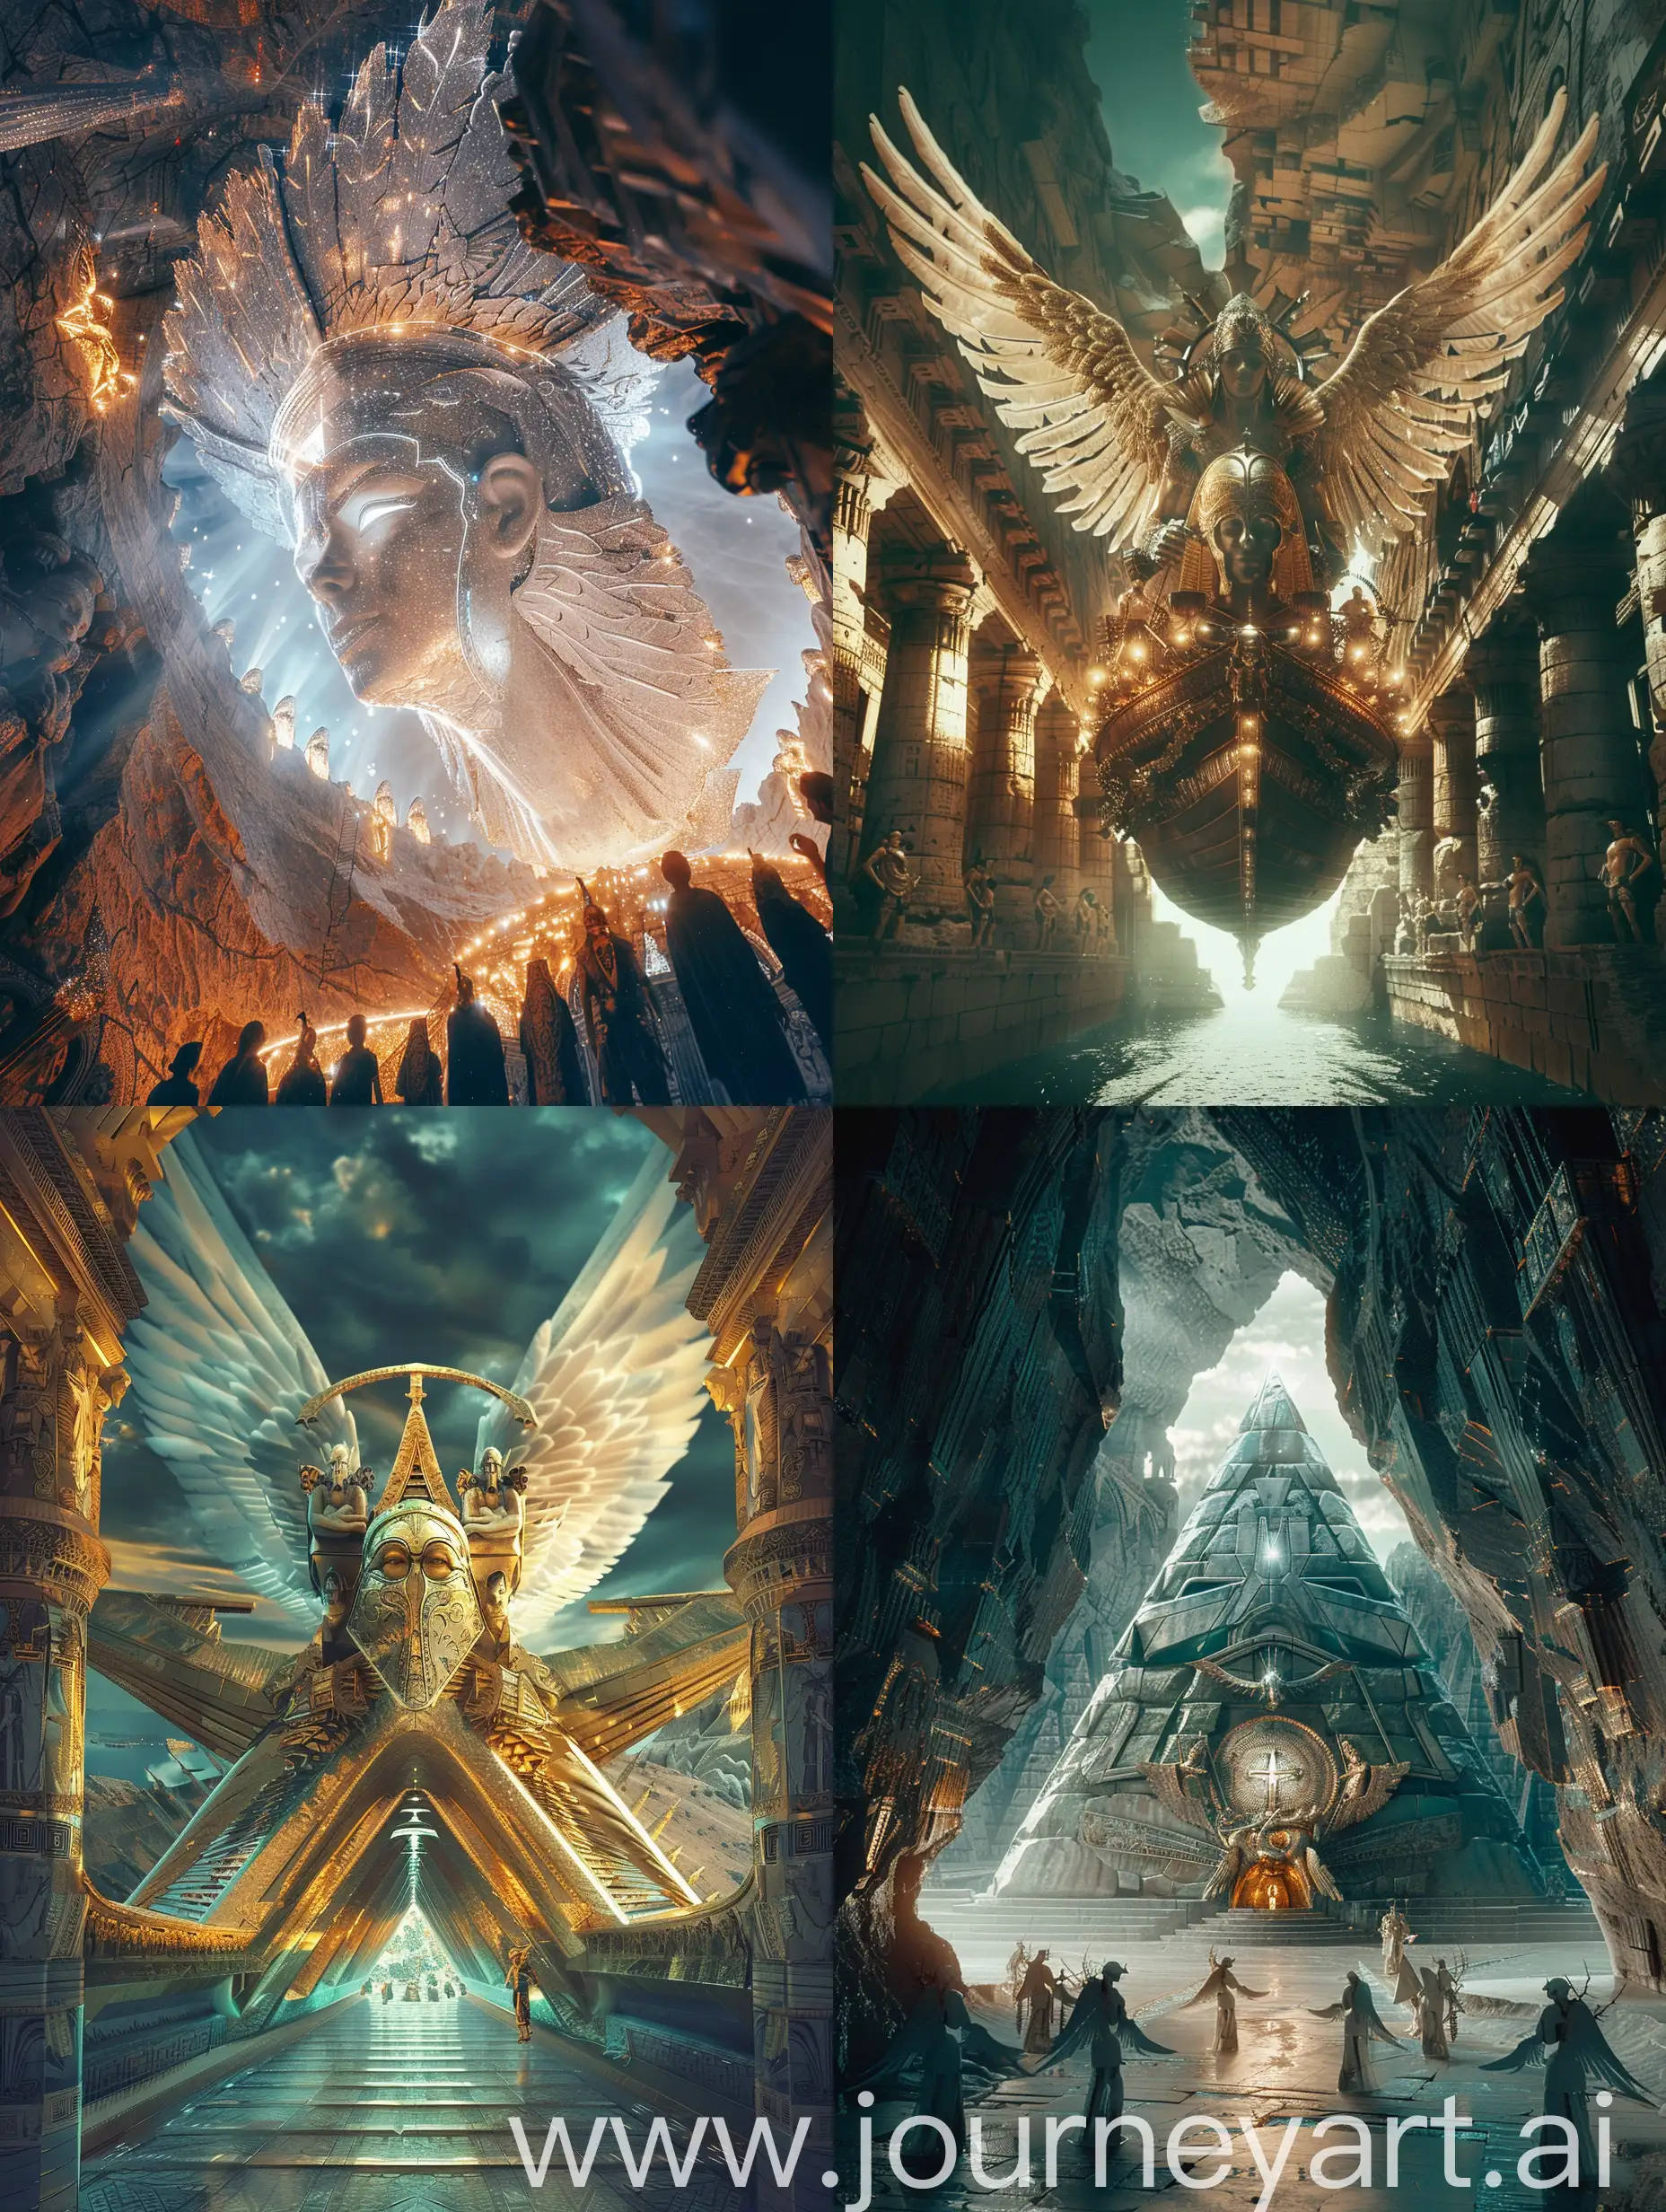 a formidable team of argonauts travelling inside an interior view of epic heroic Argo flying celestial greek warship, with angelic protection figure head , made from intricate glowing cathedral details , emerging from a giant pyramid time portal dramatic cinematic photography